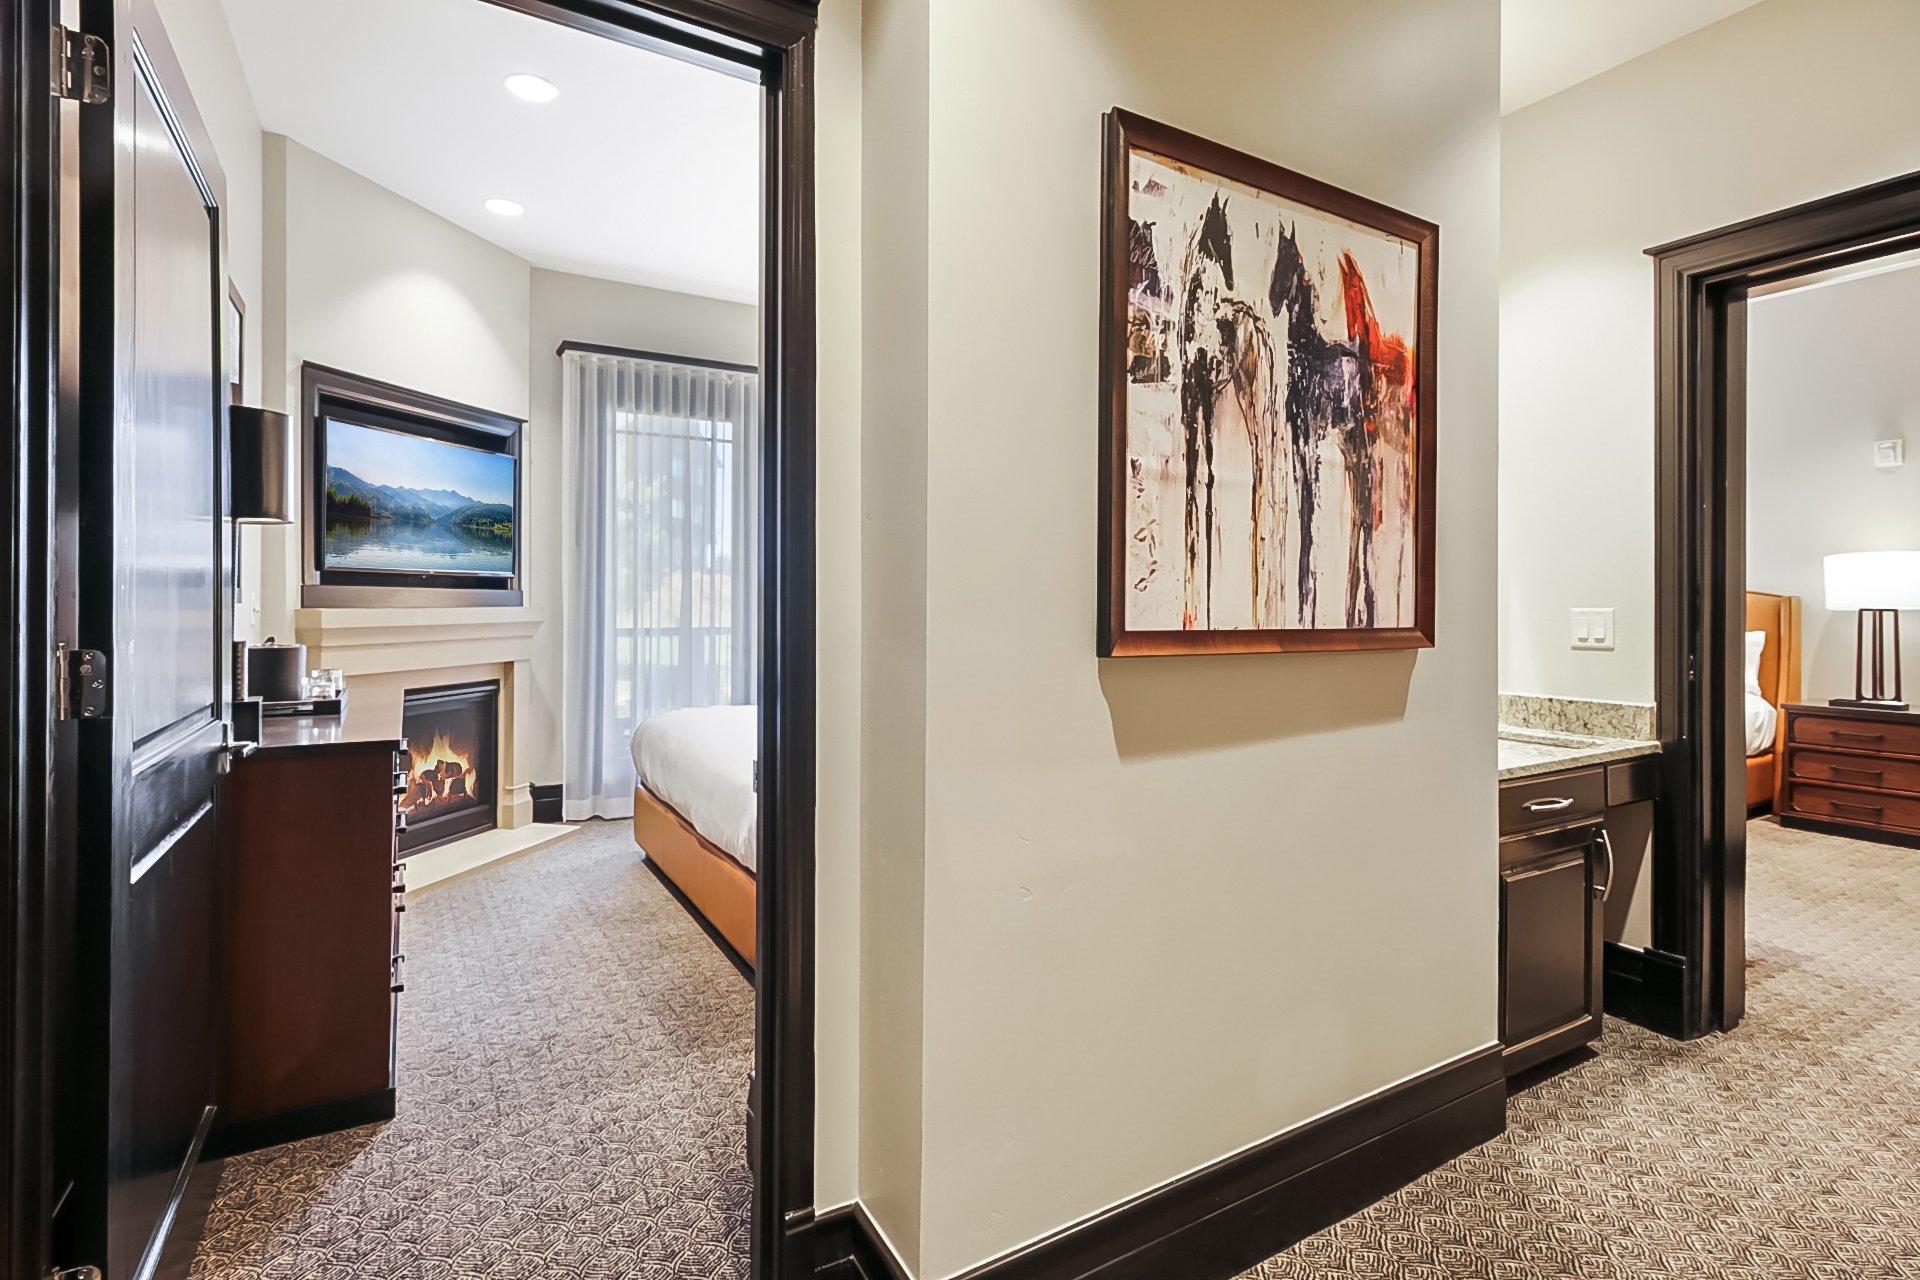 Walking from the grand unit, hallways to 2 guest room suites. Door to close for privacy as needed.